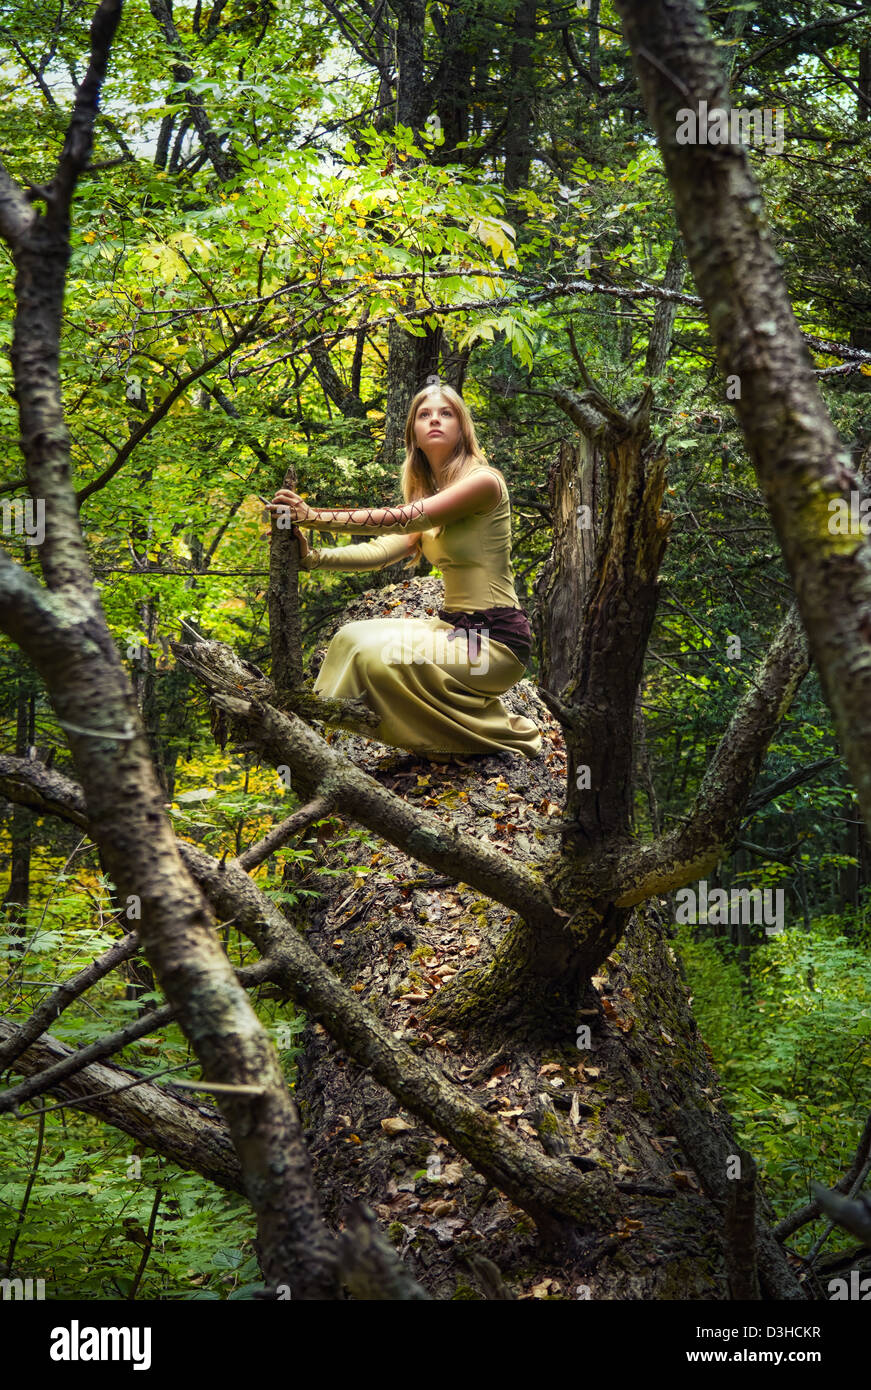 Blond girl in a magic forest Stock Photo